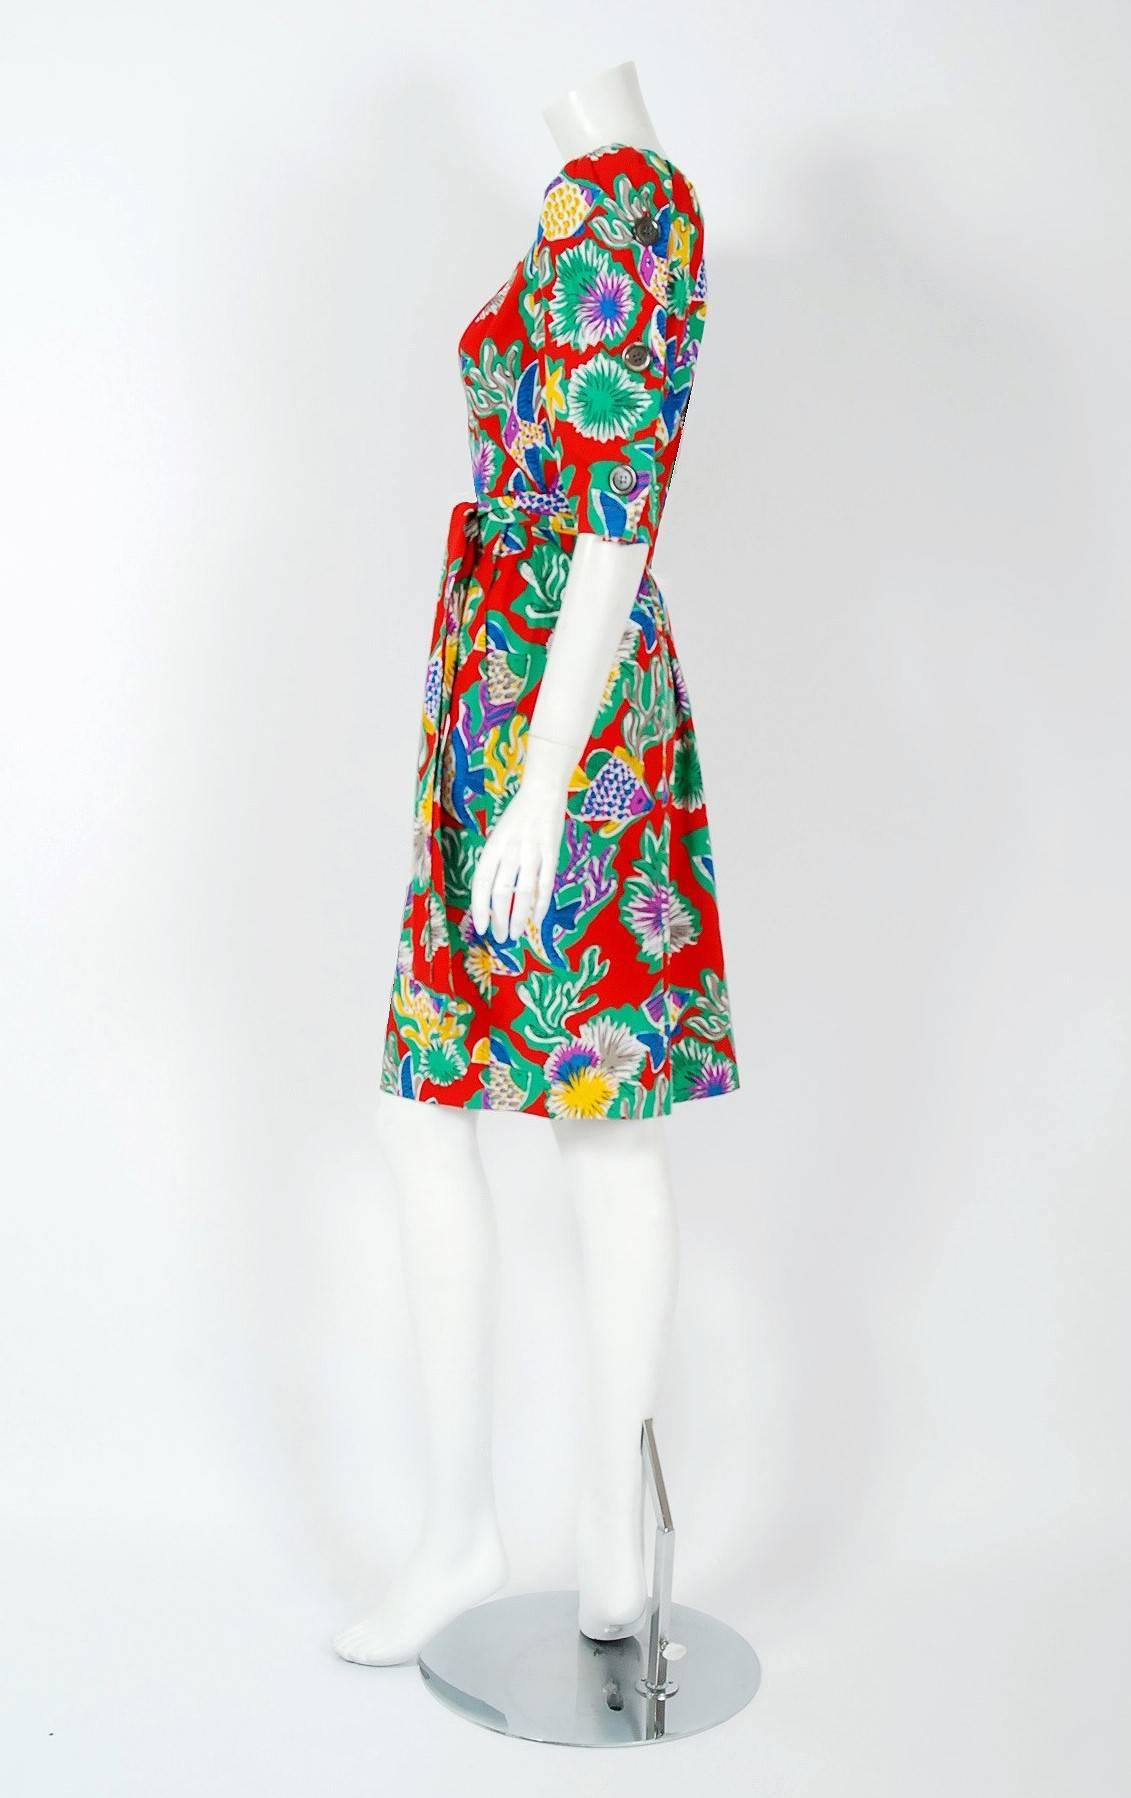 Breathtaking Yves Saint Laurent colorful novelty tropical fish-print cotton dress from the infamous spring/summer 1981 Rive Gauche collection. Pieces from this decade are very rare and are true examples of fashion history. The bodice has a gorgeous